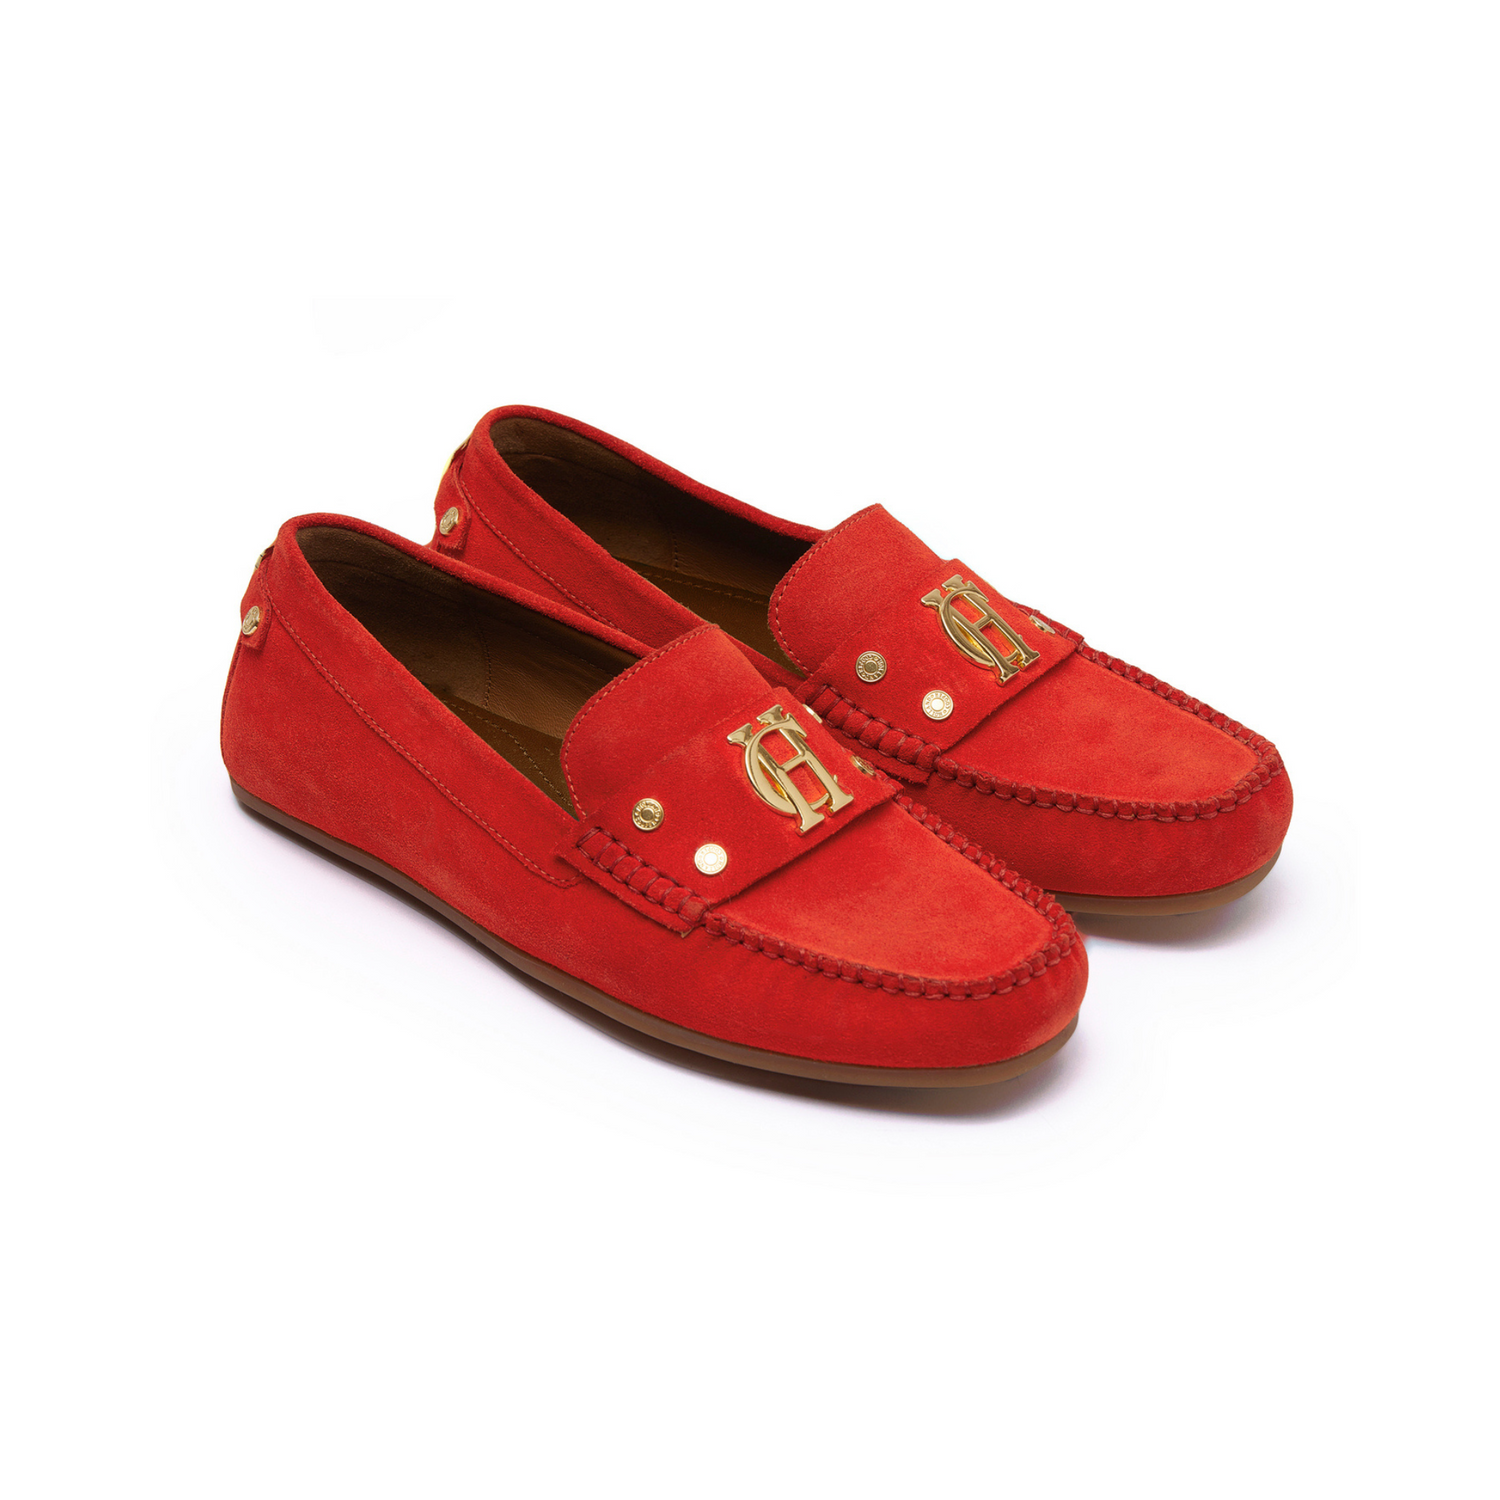 The Driving Loafer Neroli Suede